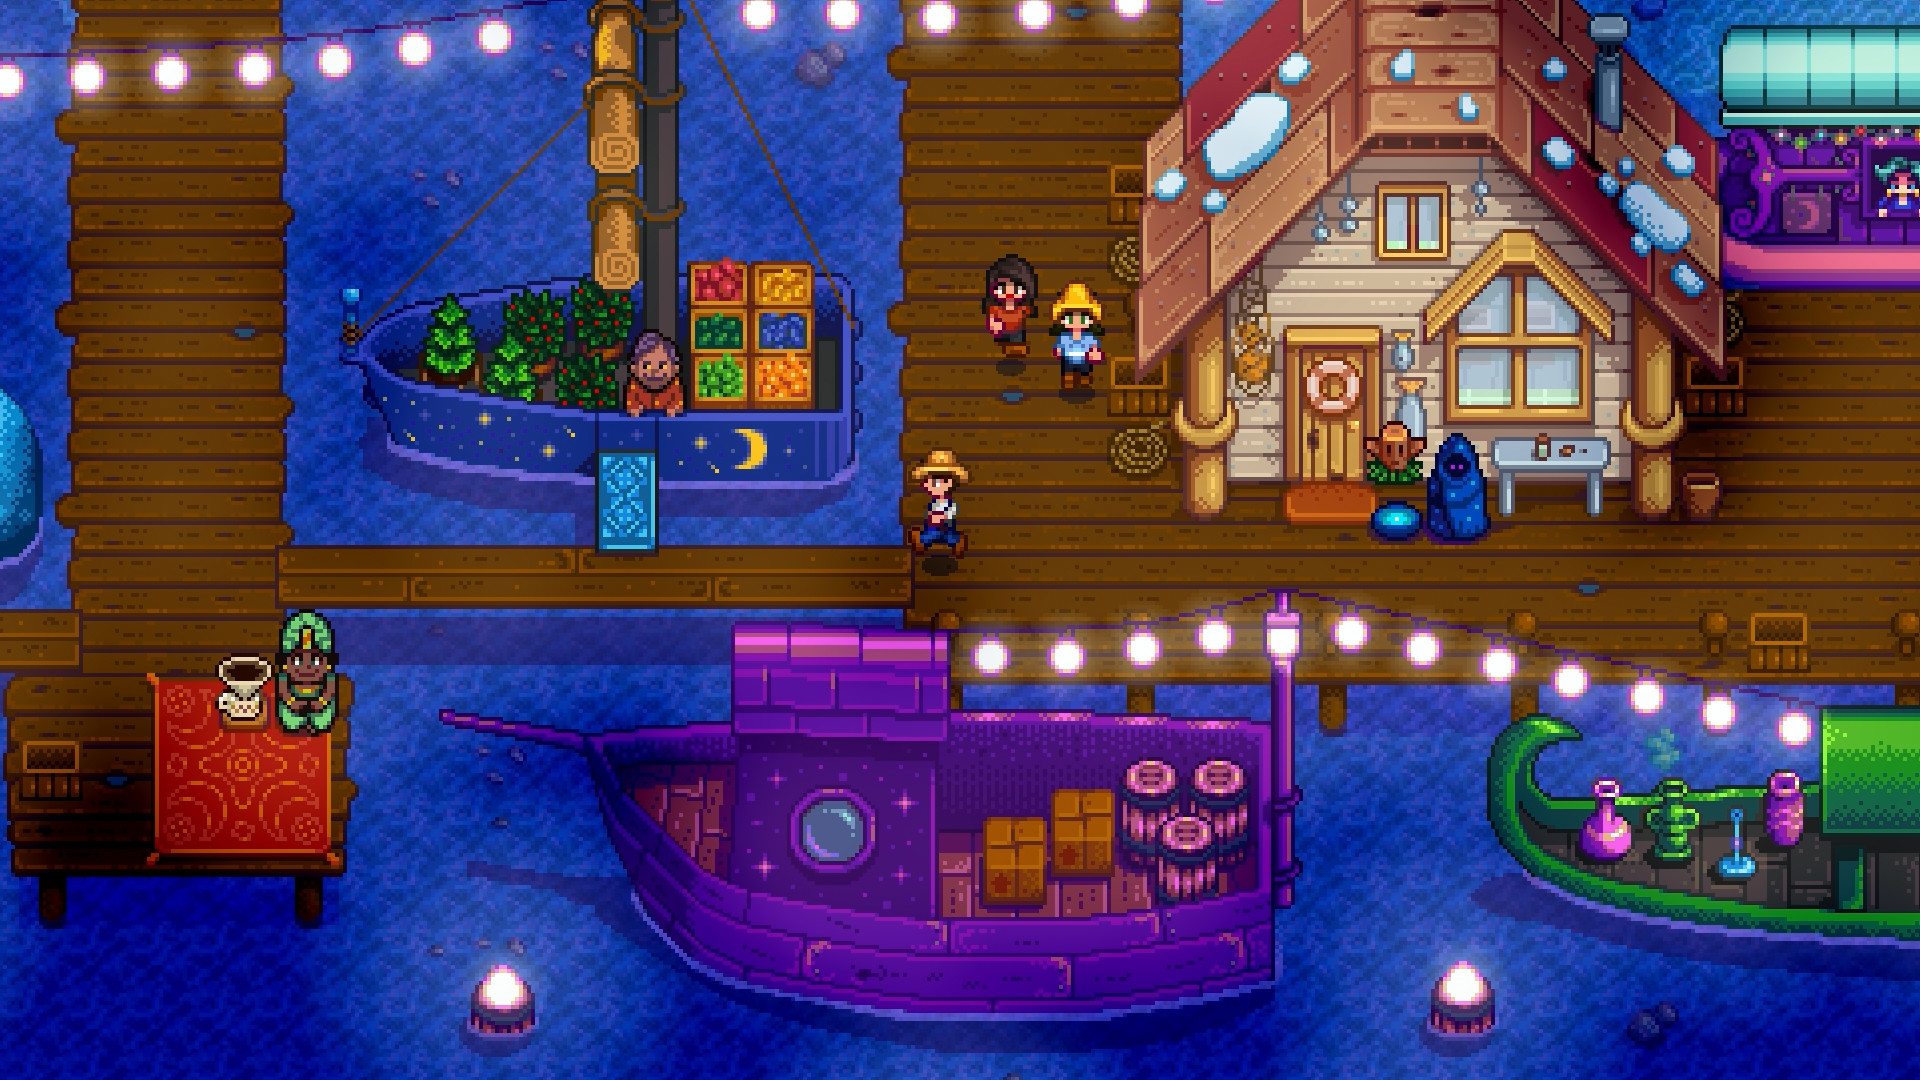 A Stardew Valley player character walking along a boardwalk lit with strands of light bulbs